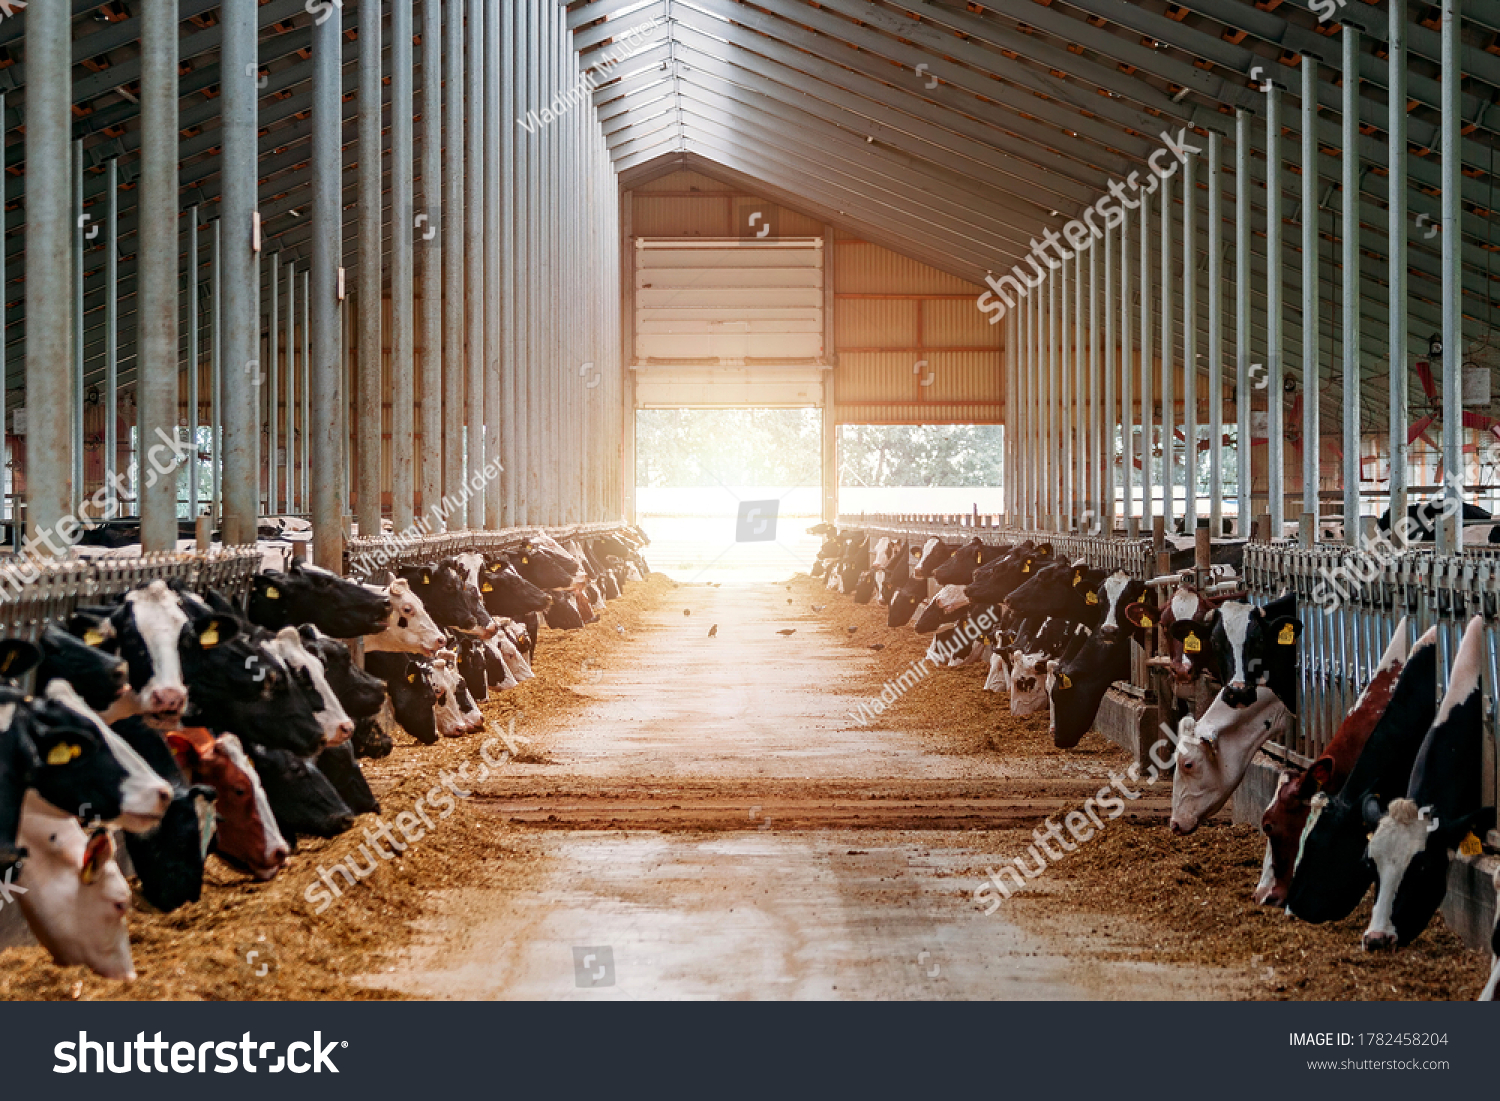 Diary cows in modern free livestock stall #1782458204